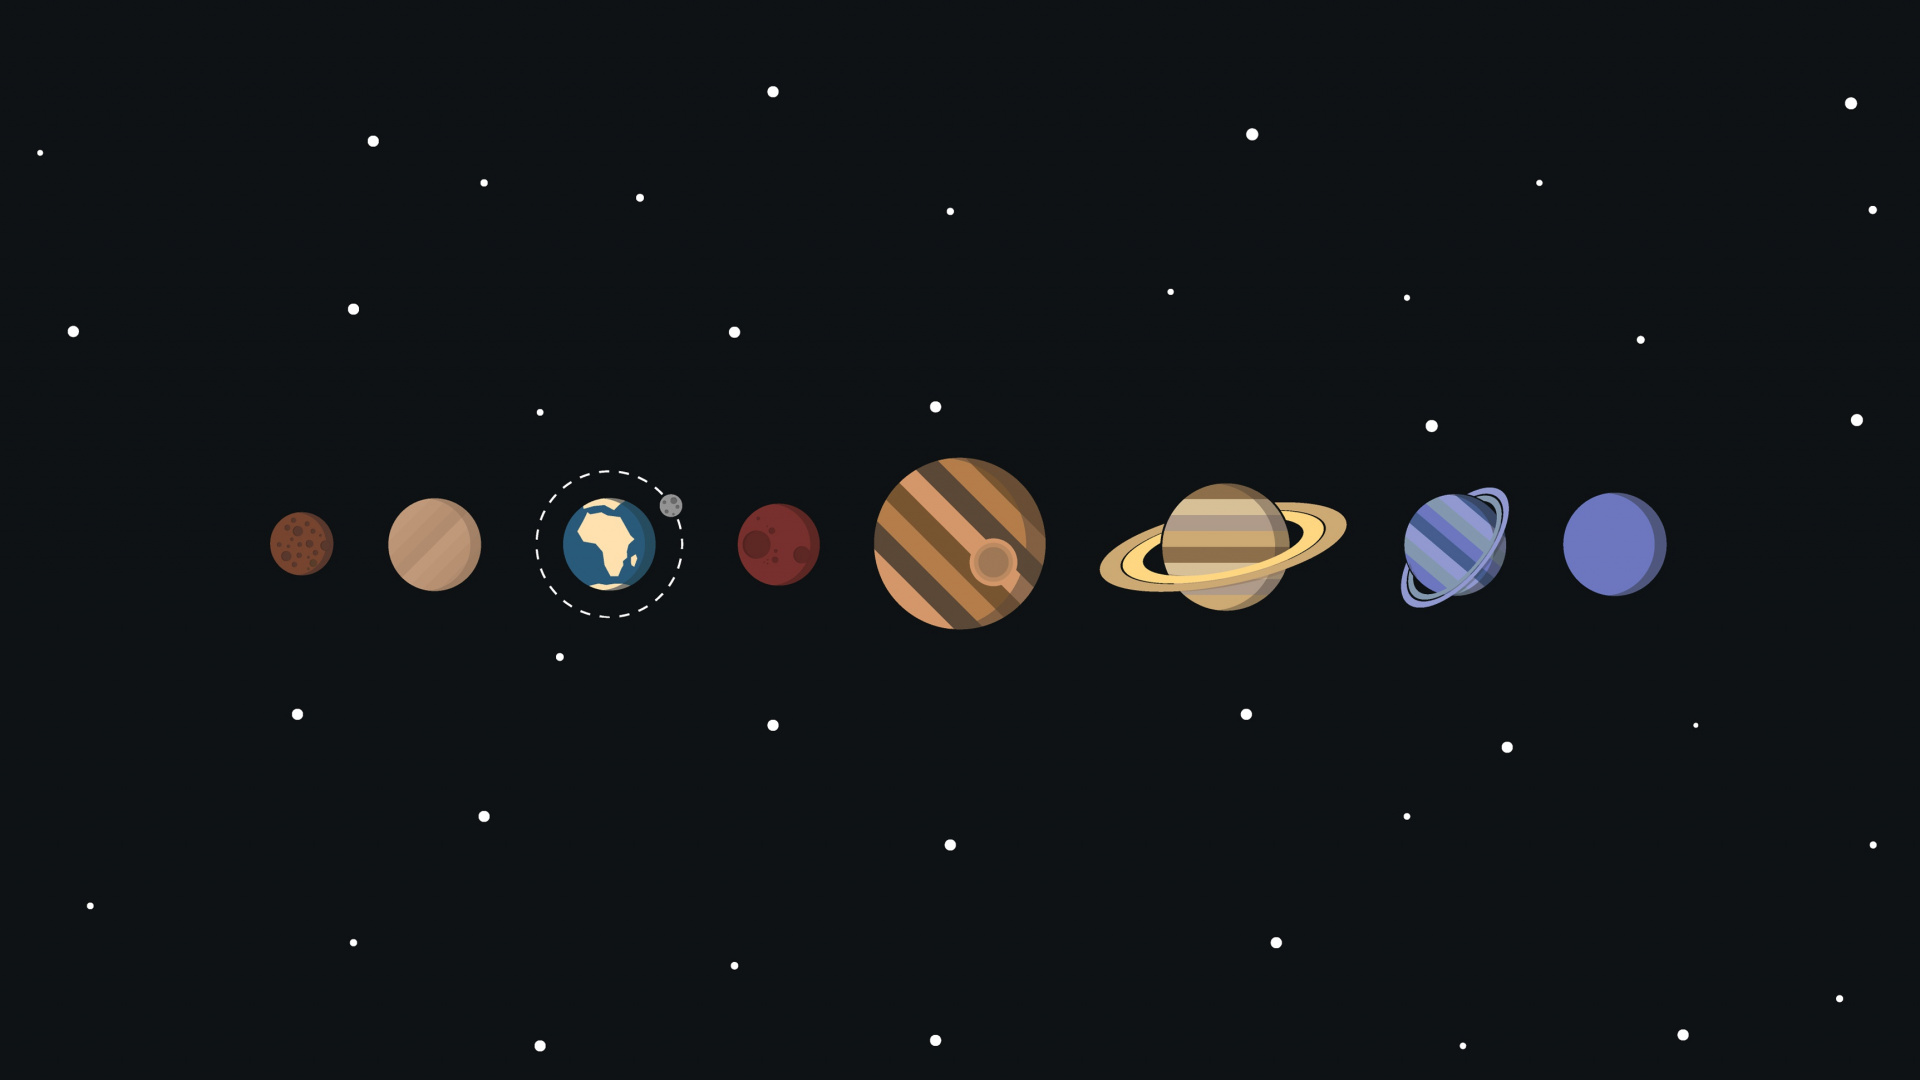 solar system hd wallpapers 1080p